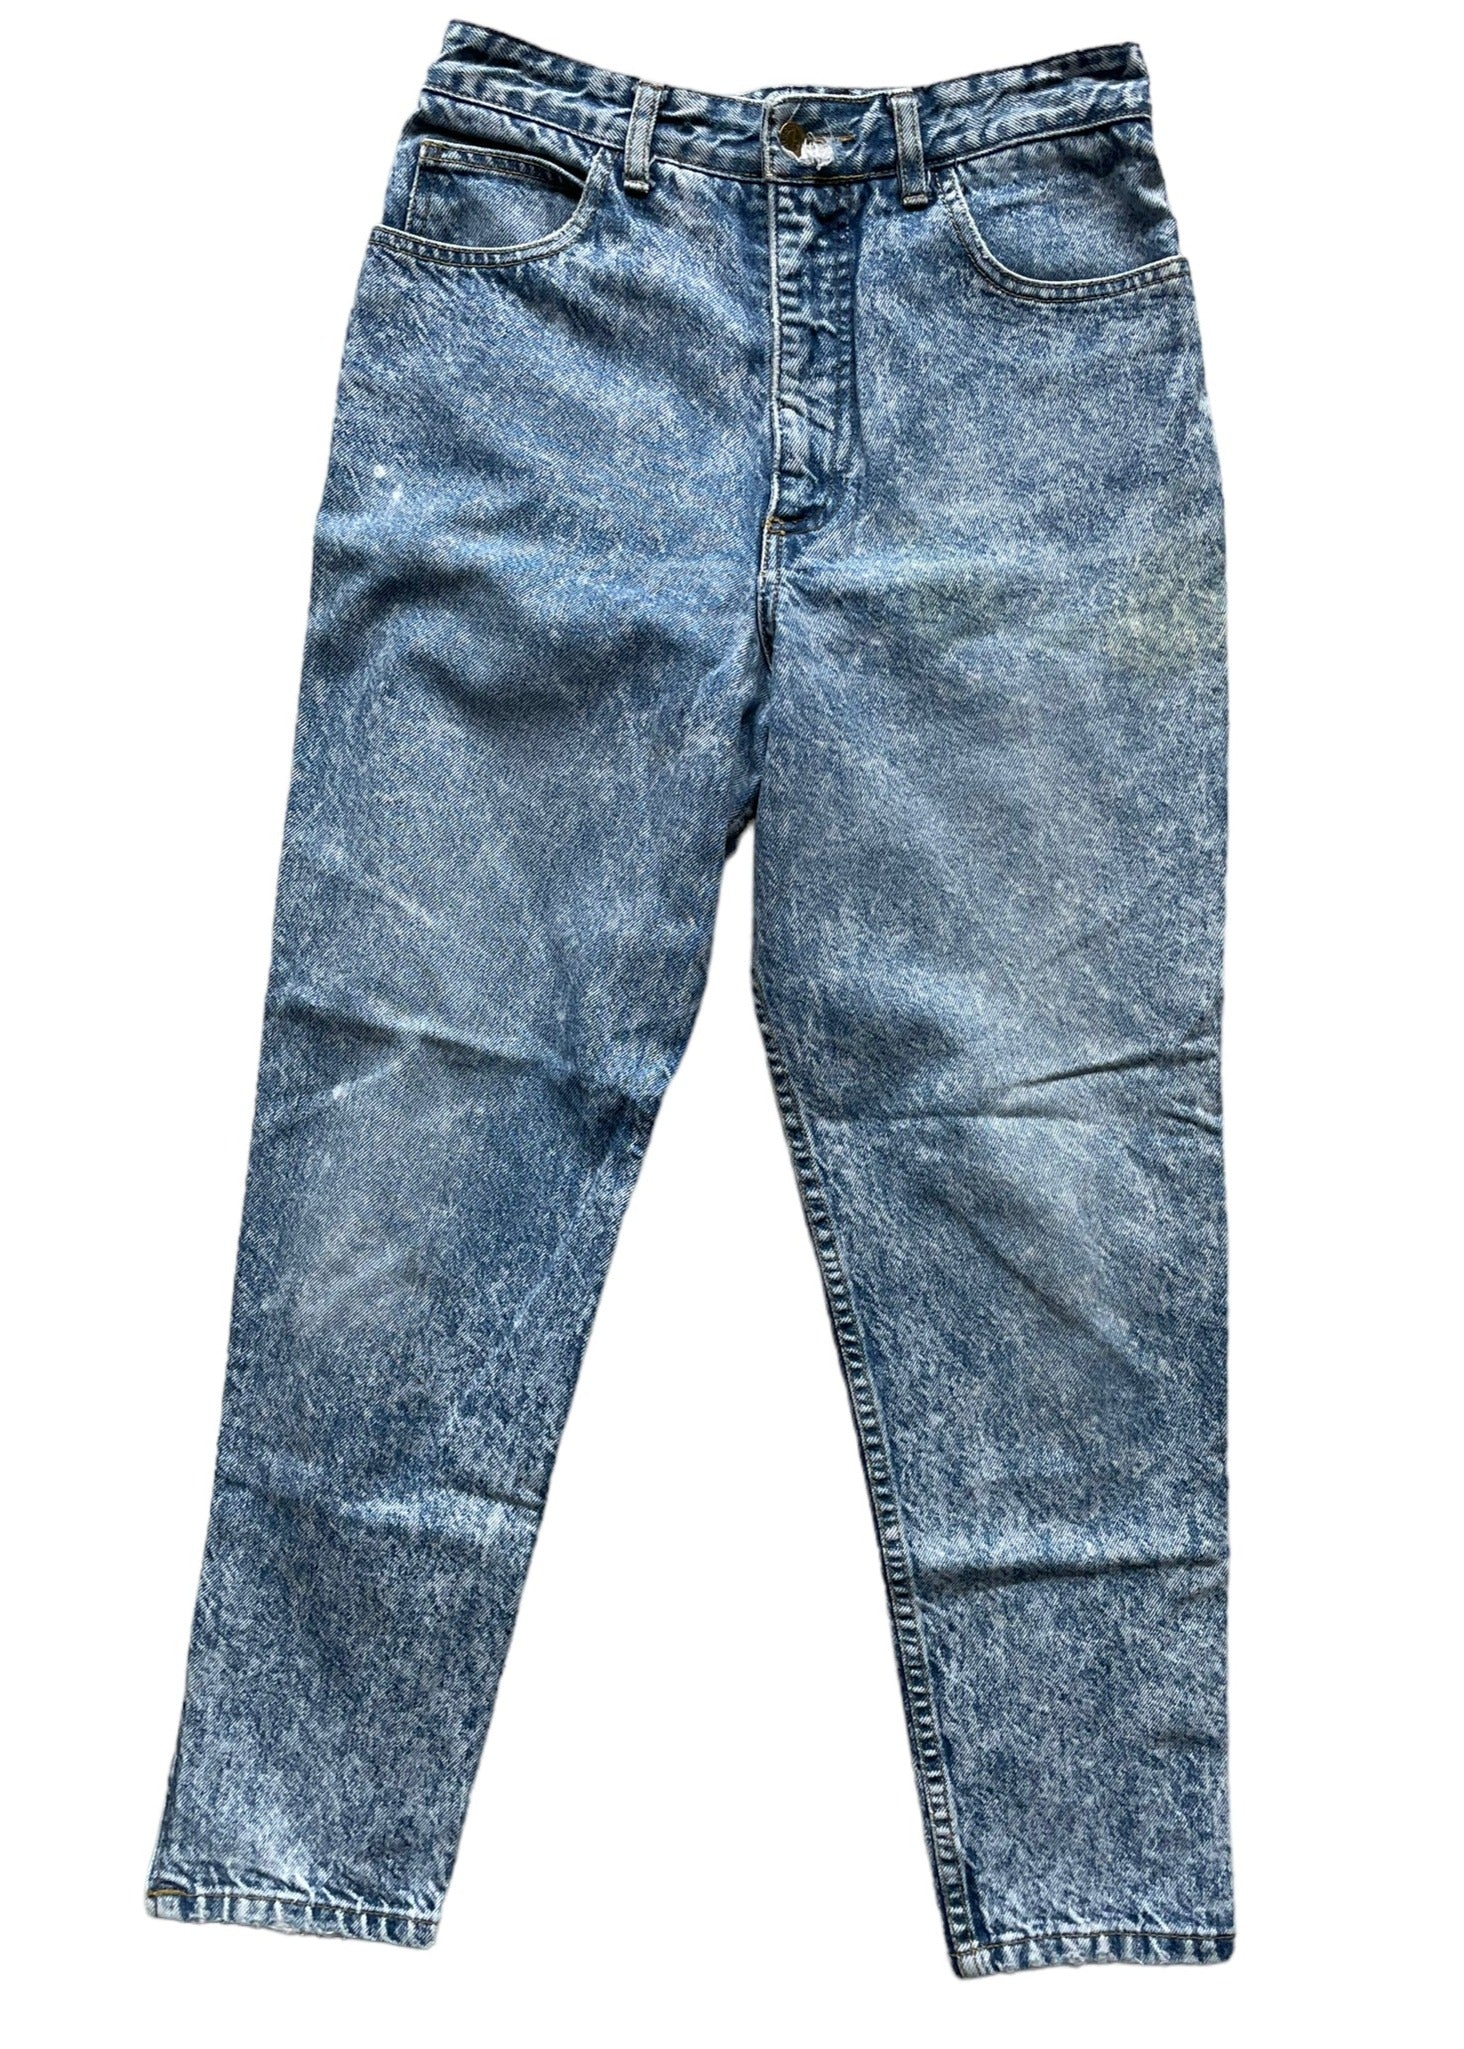 Full front view of Vintage 80s Ankle Zip Acid Wash Guess Jeans